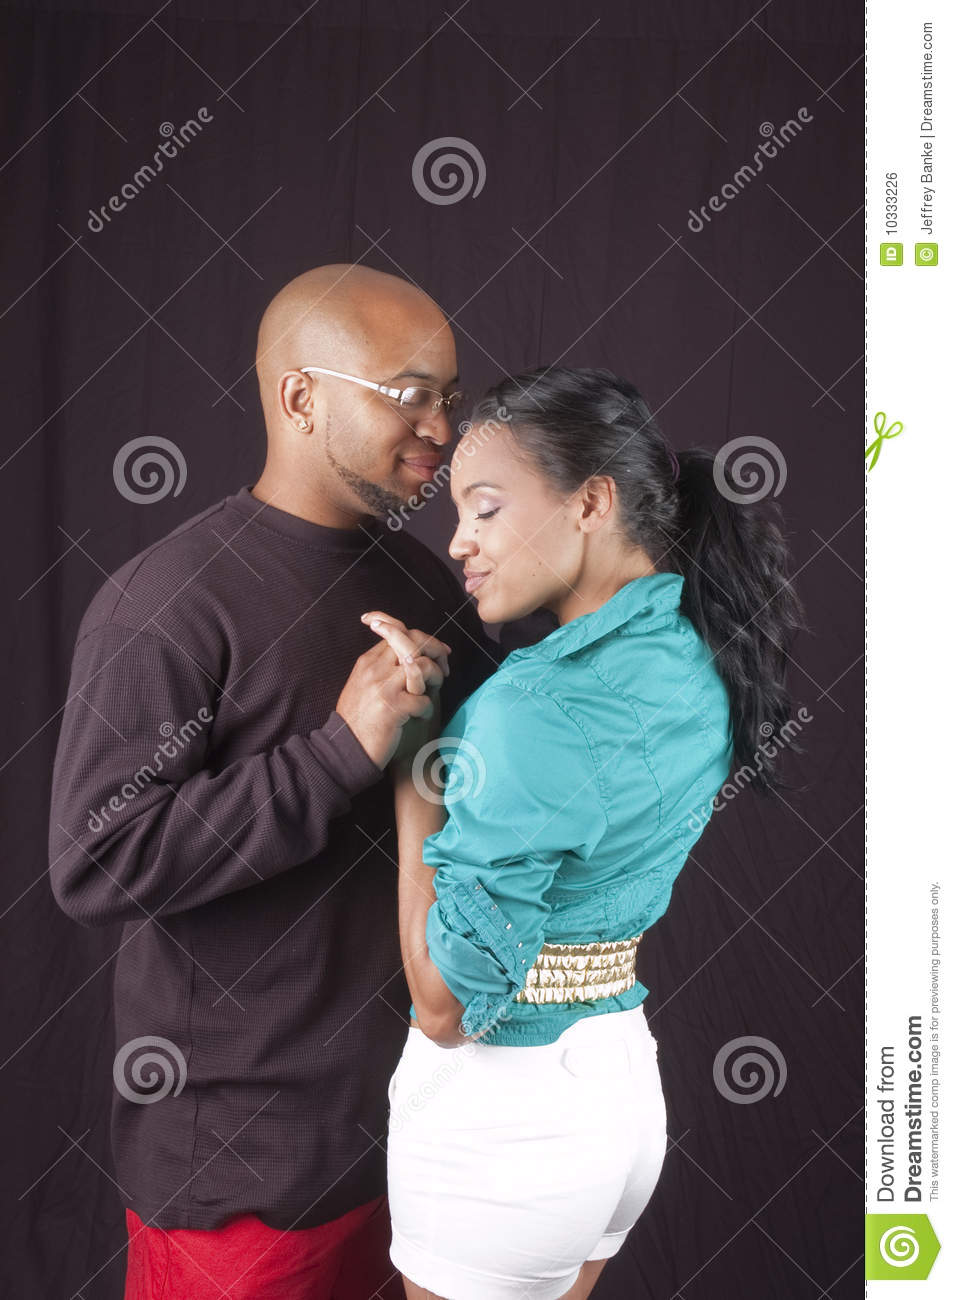 Happy African American Couple Royalty Free Stock Image   Image